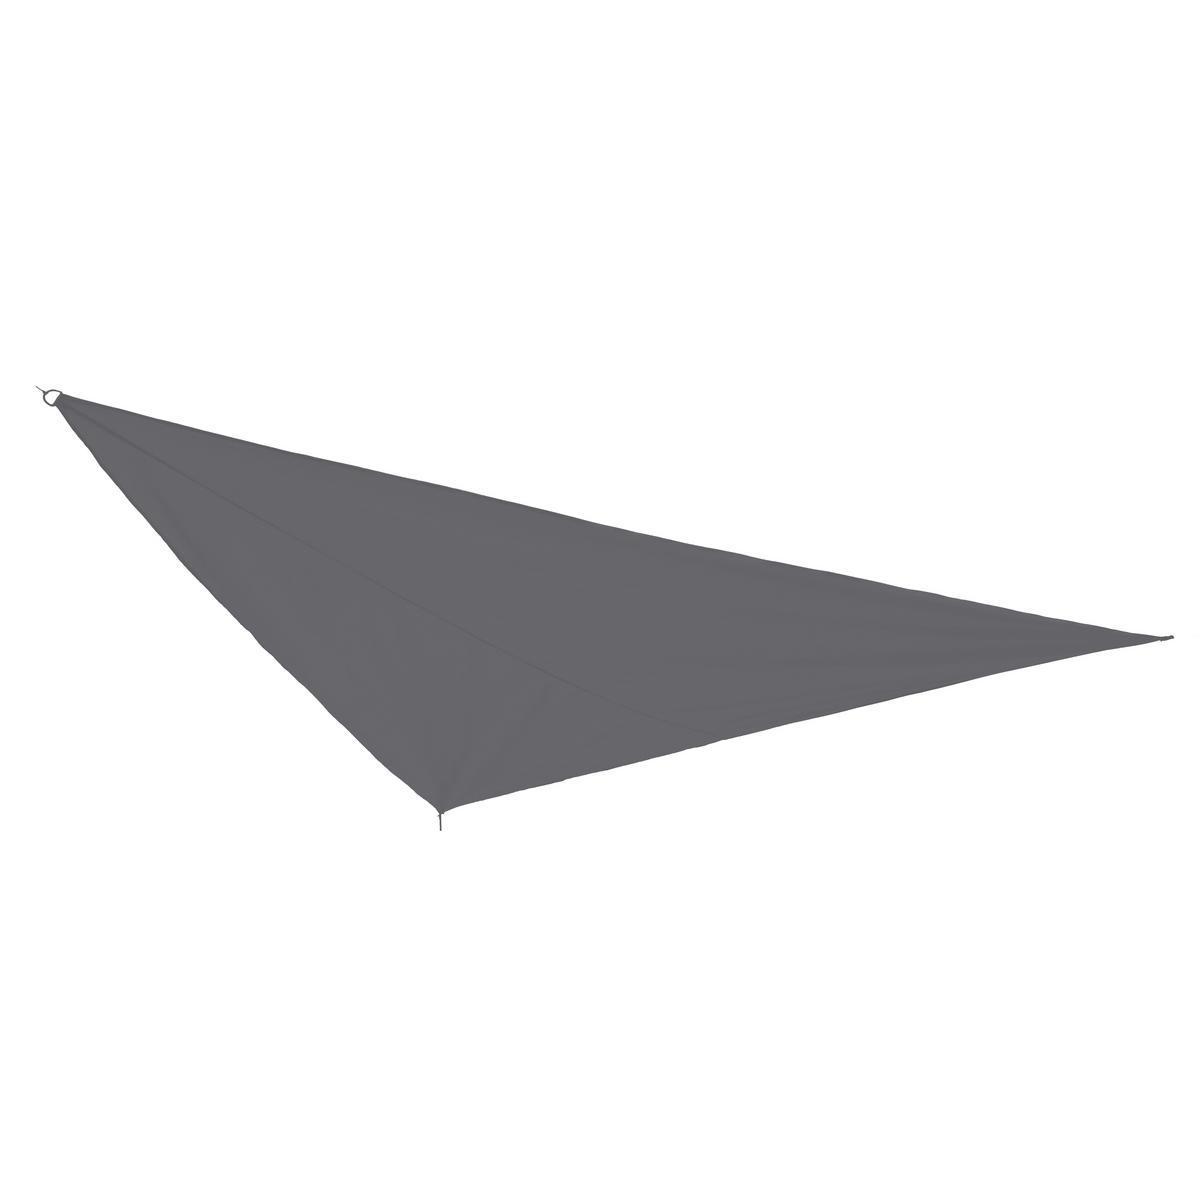 Voile d'ombrage triangulaire - Polyester et Polyamide - 3 x 3 x 3 m - Anthracite